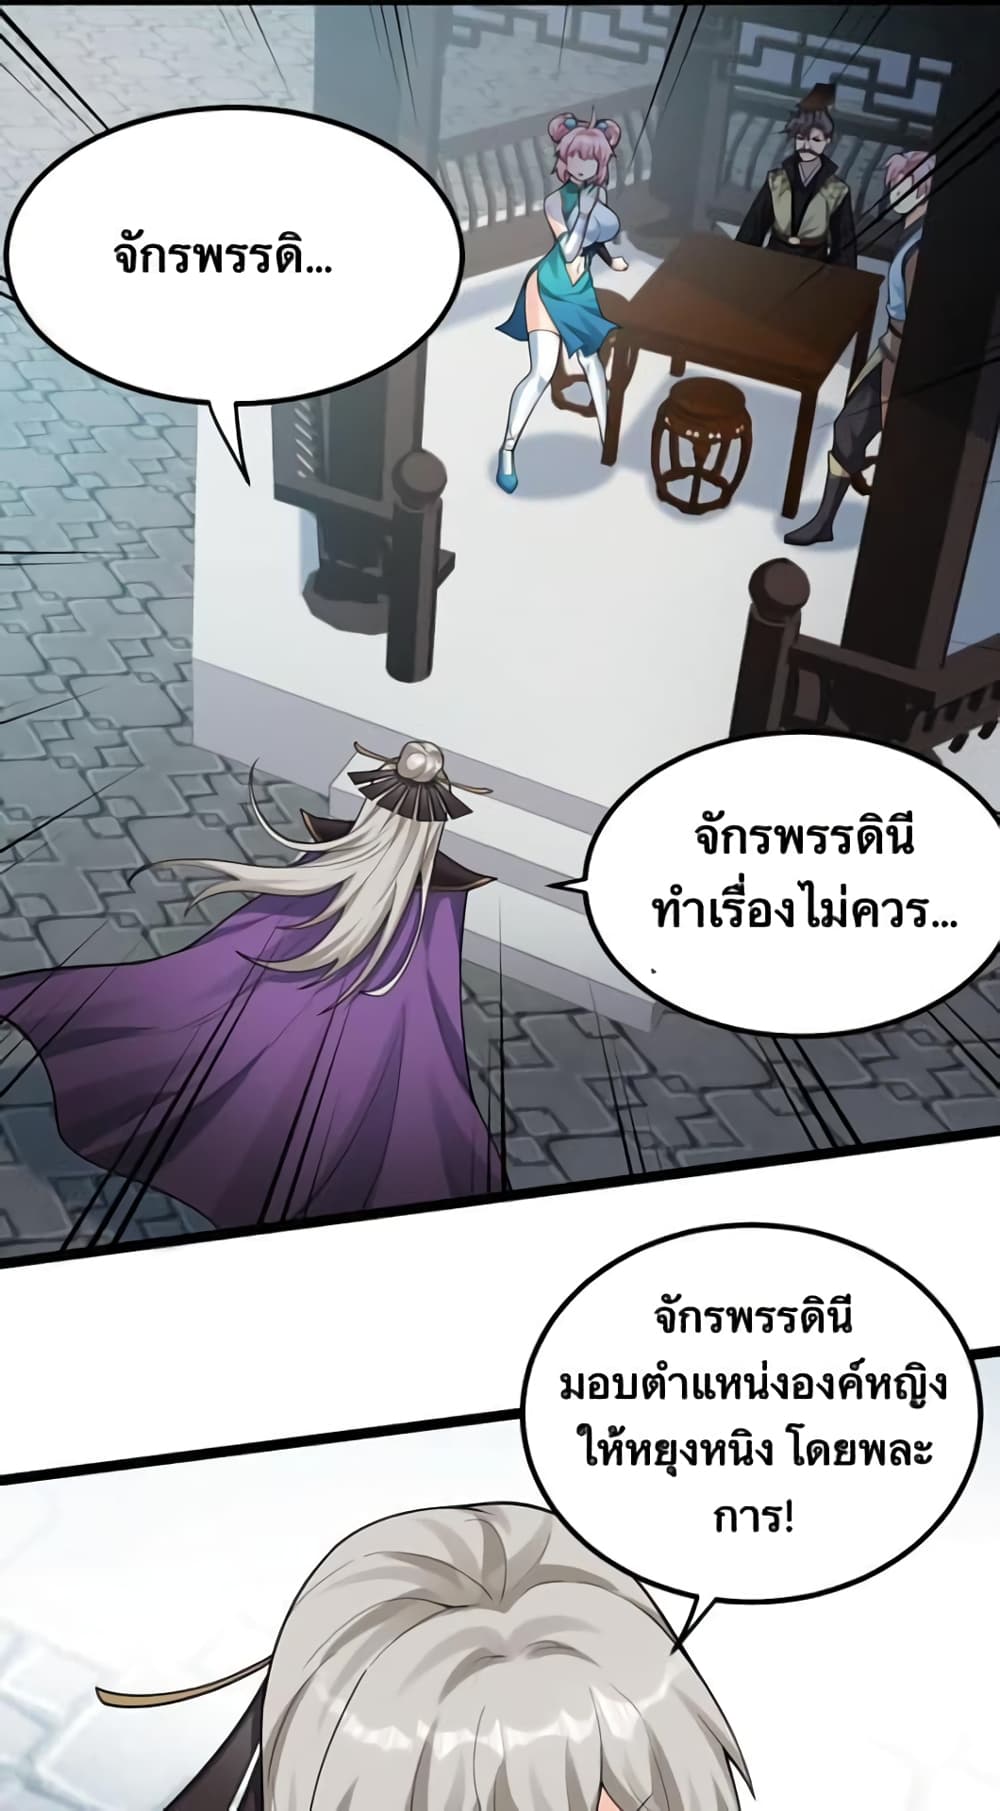 Godsian Masian from Another World ตอนที่ 120 (2)